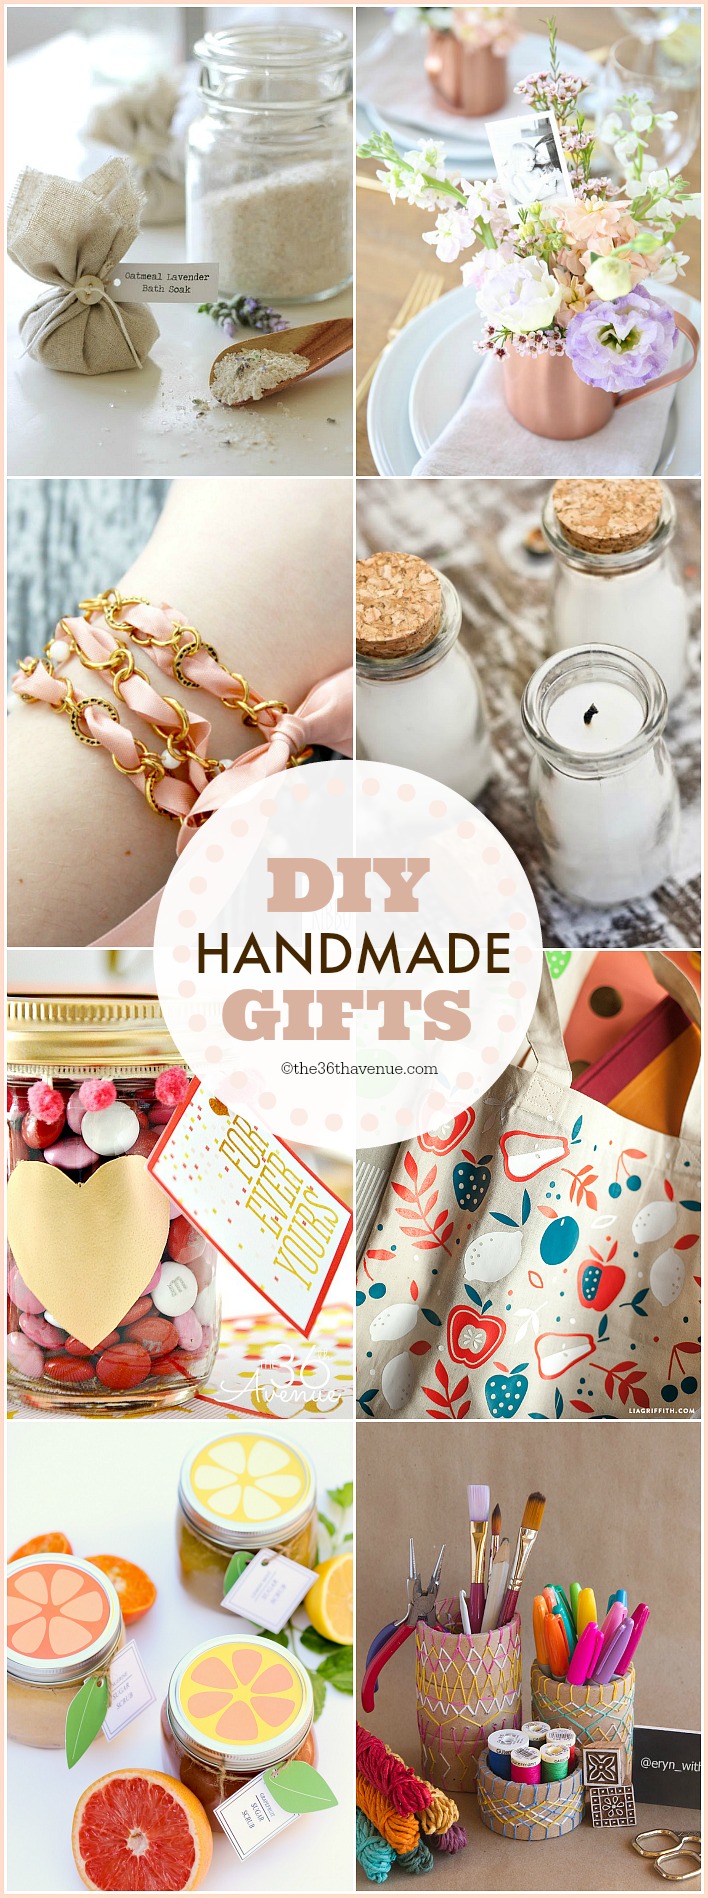 https://www.the36thavenue.com/wp-content/uploads/2015/04/DIY-Handmade-Gifts-at-the36thavenue.com_.jpg